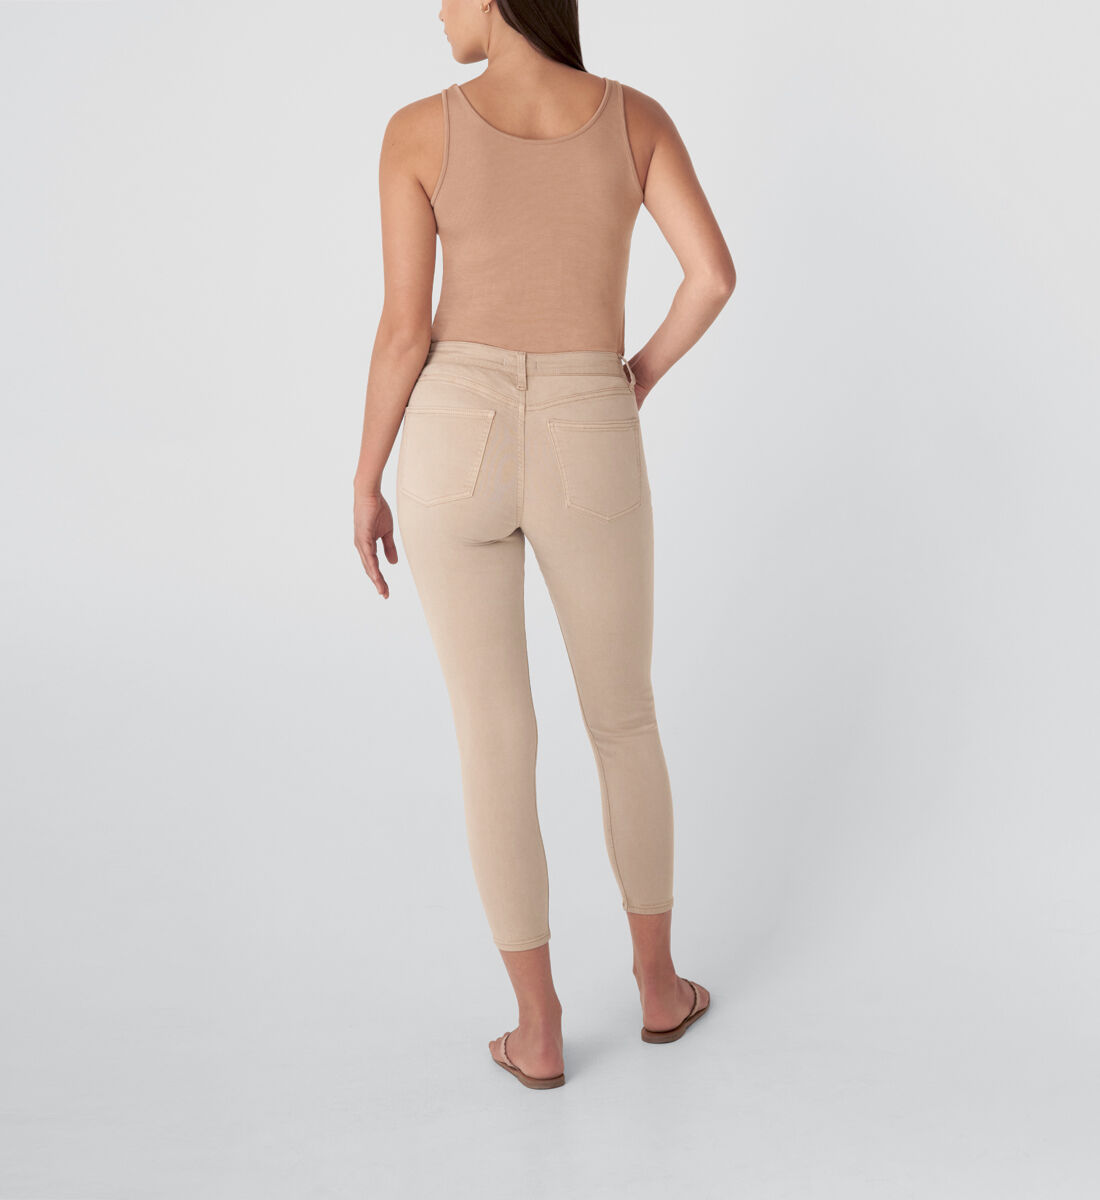 Most Wanted Mid Rise Skinny Jeans,Tan Back